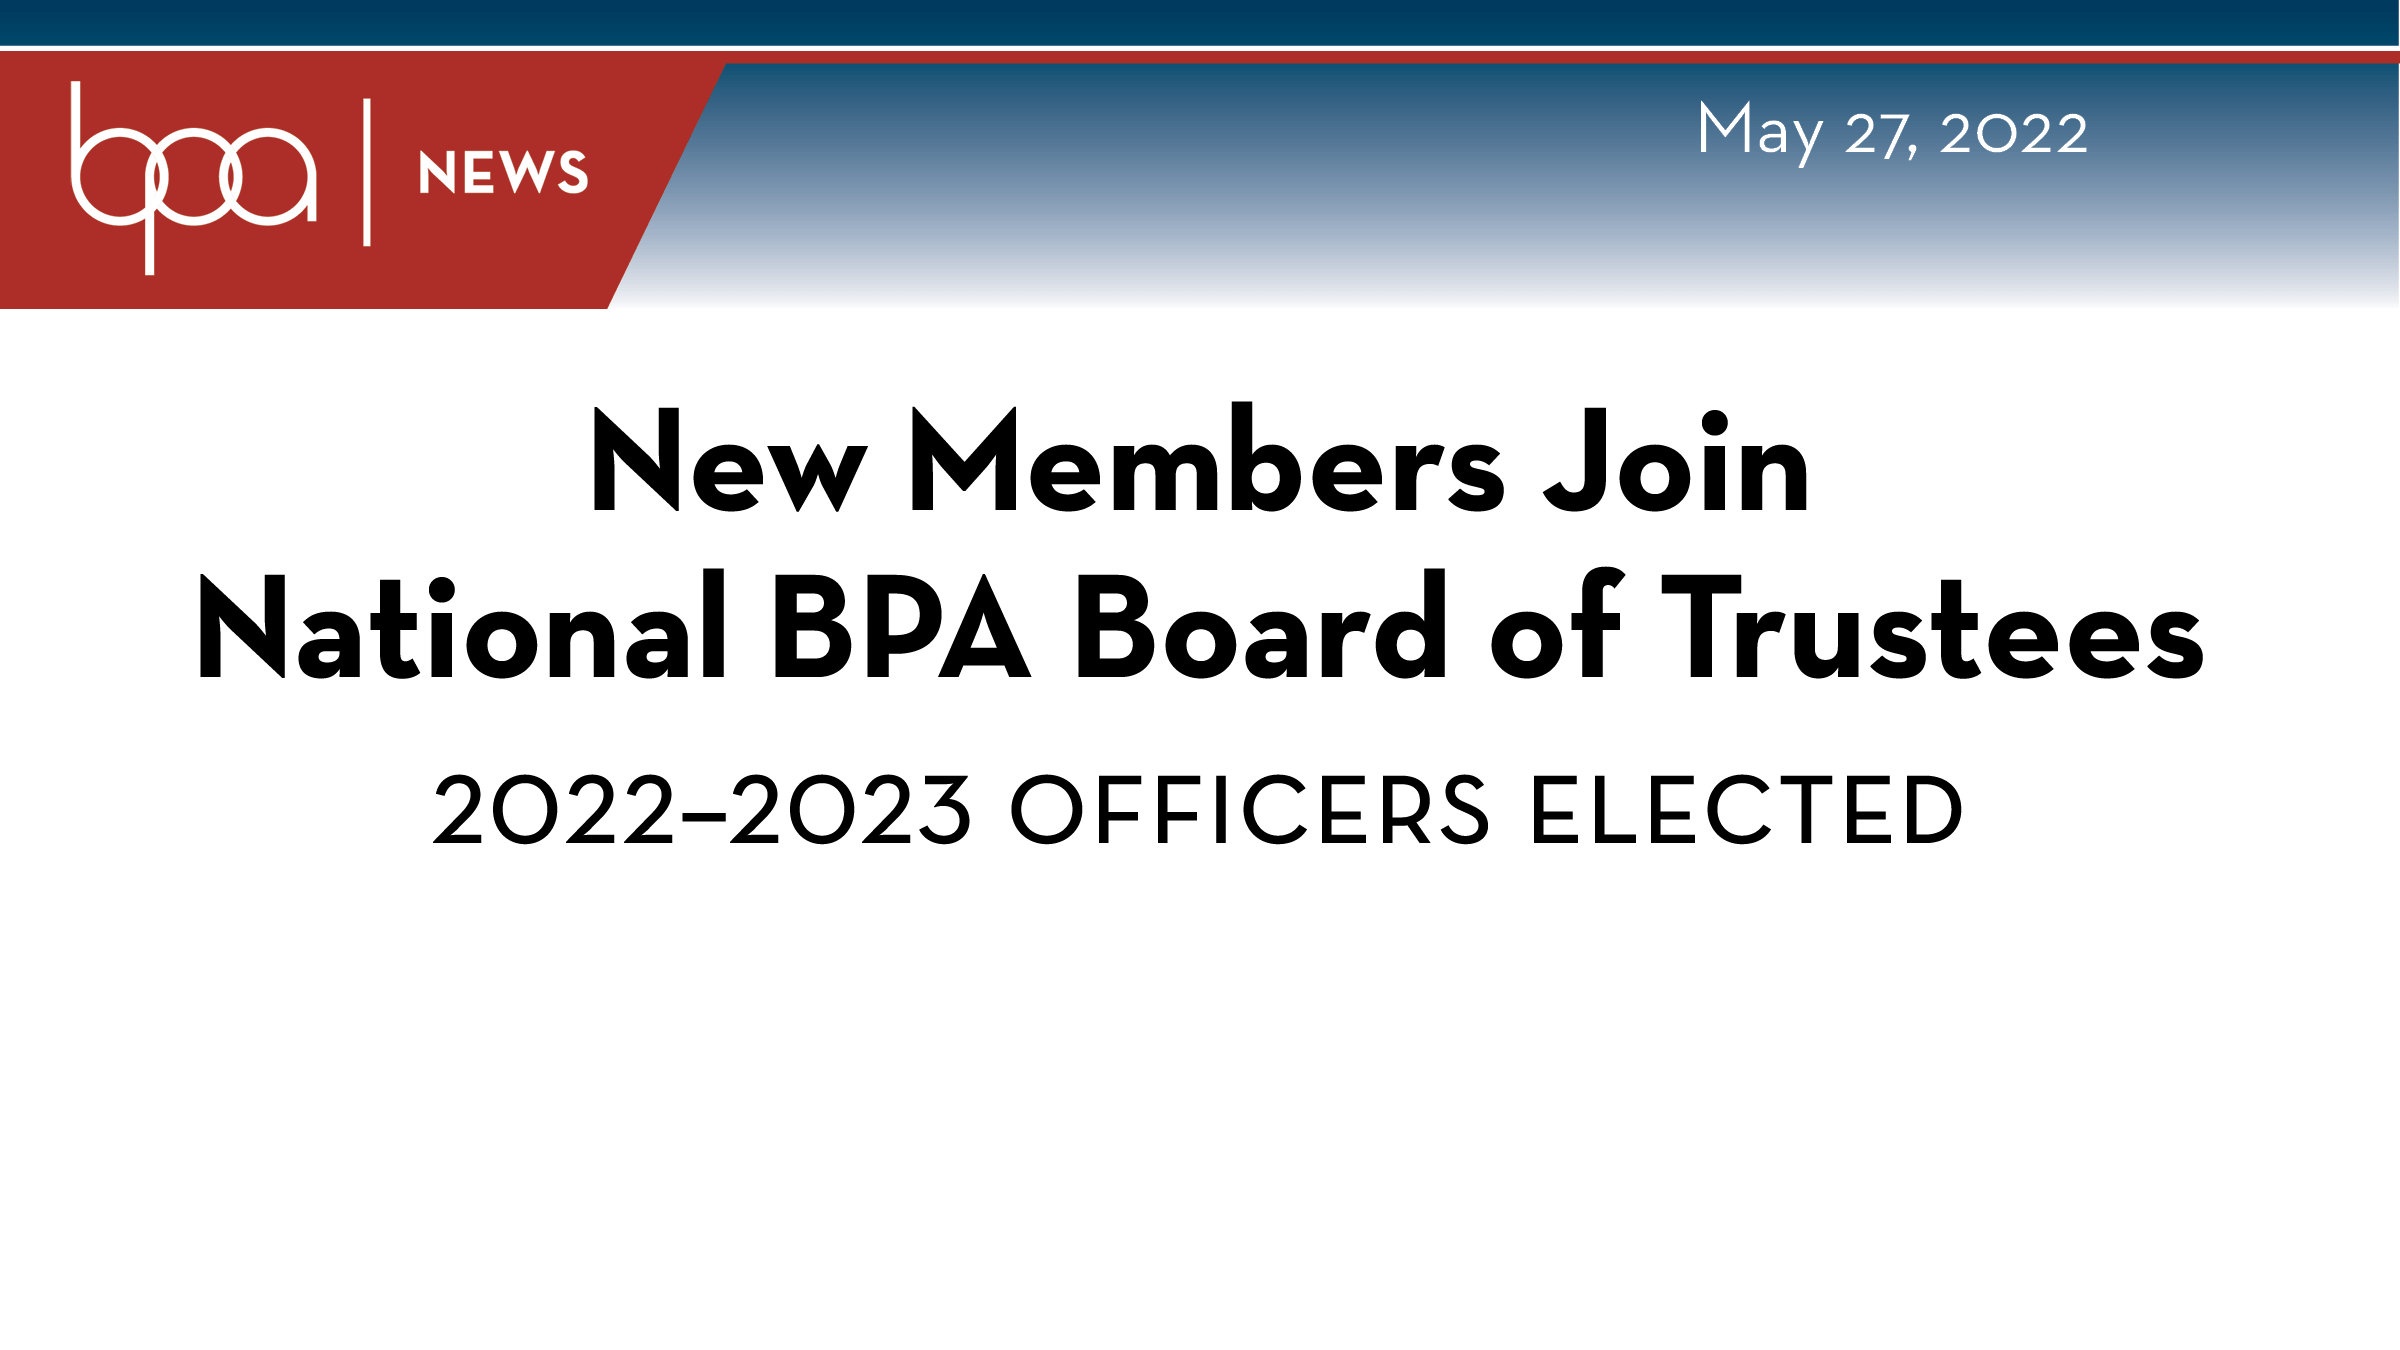 New Members Join National BPA Board of Trustees, 2022-2023 Officers Elected